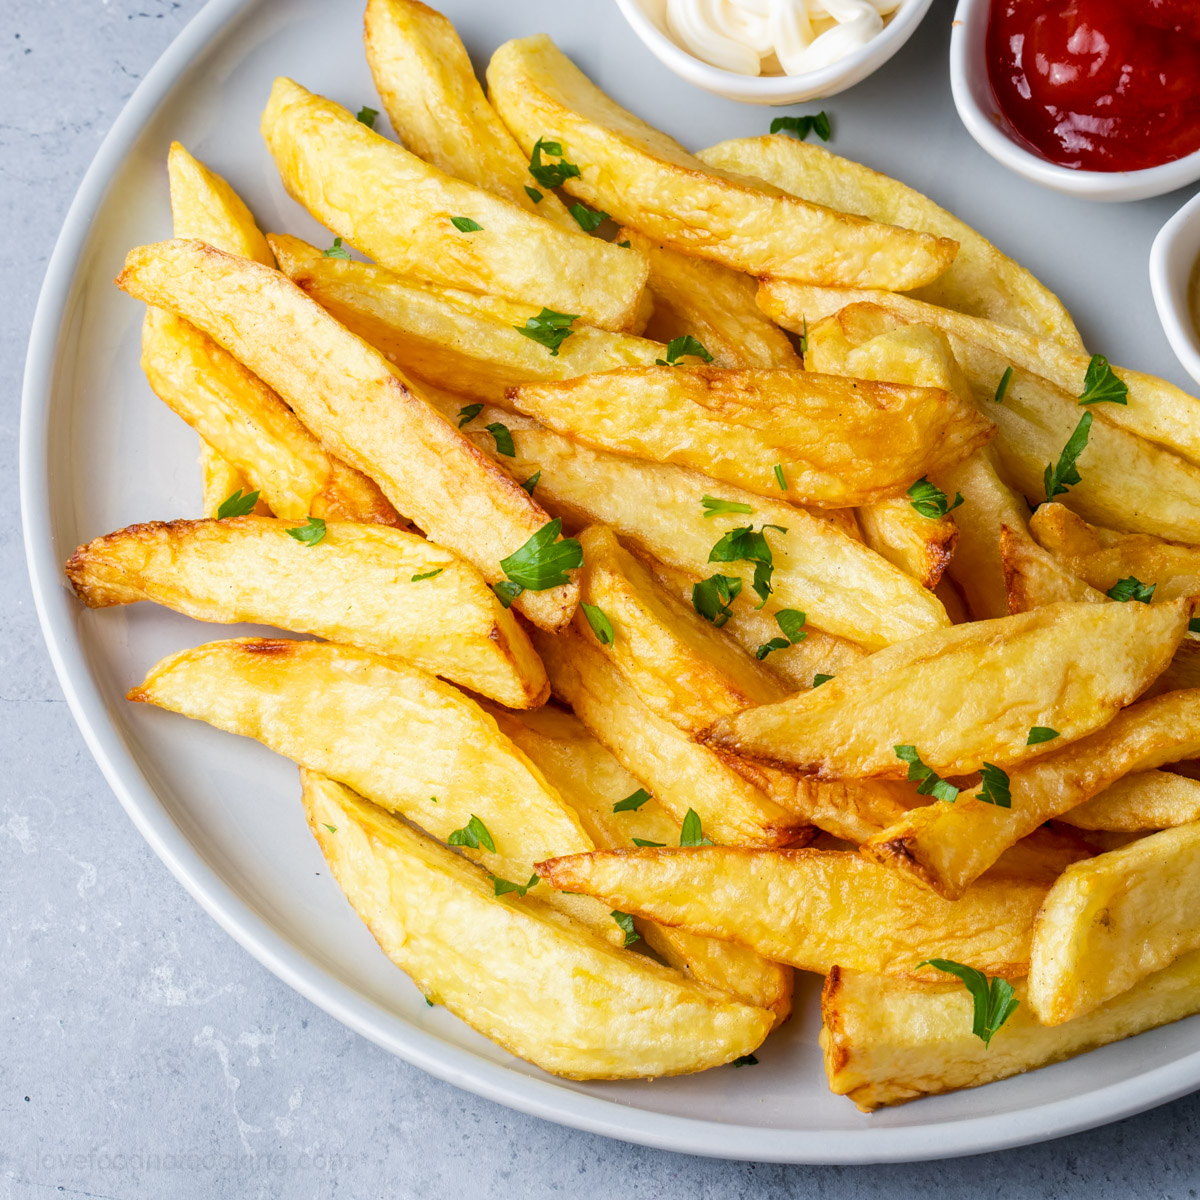 This Is Why You Need to Try Cooking Chips in an Air Fryer